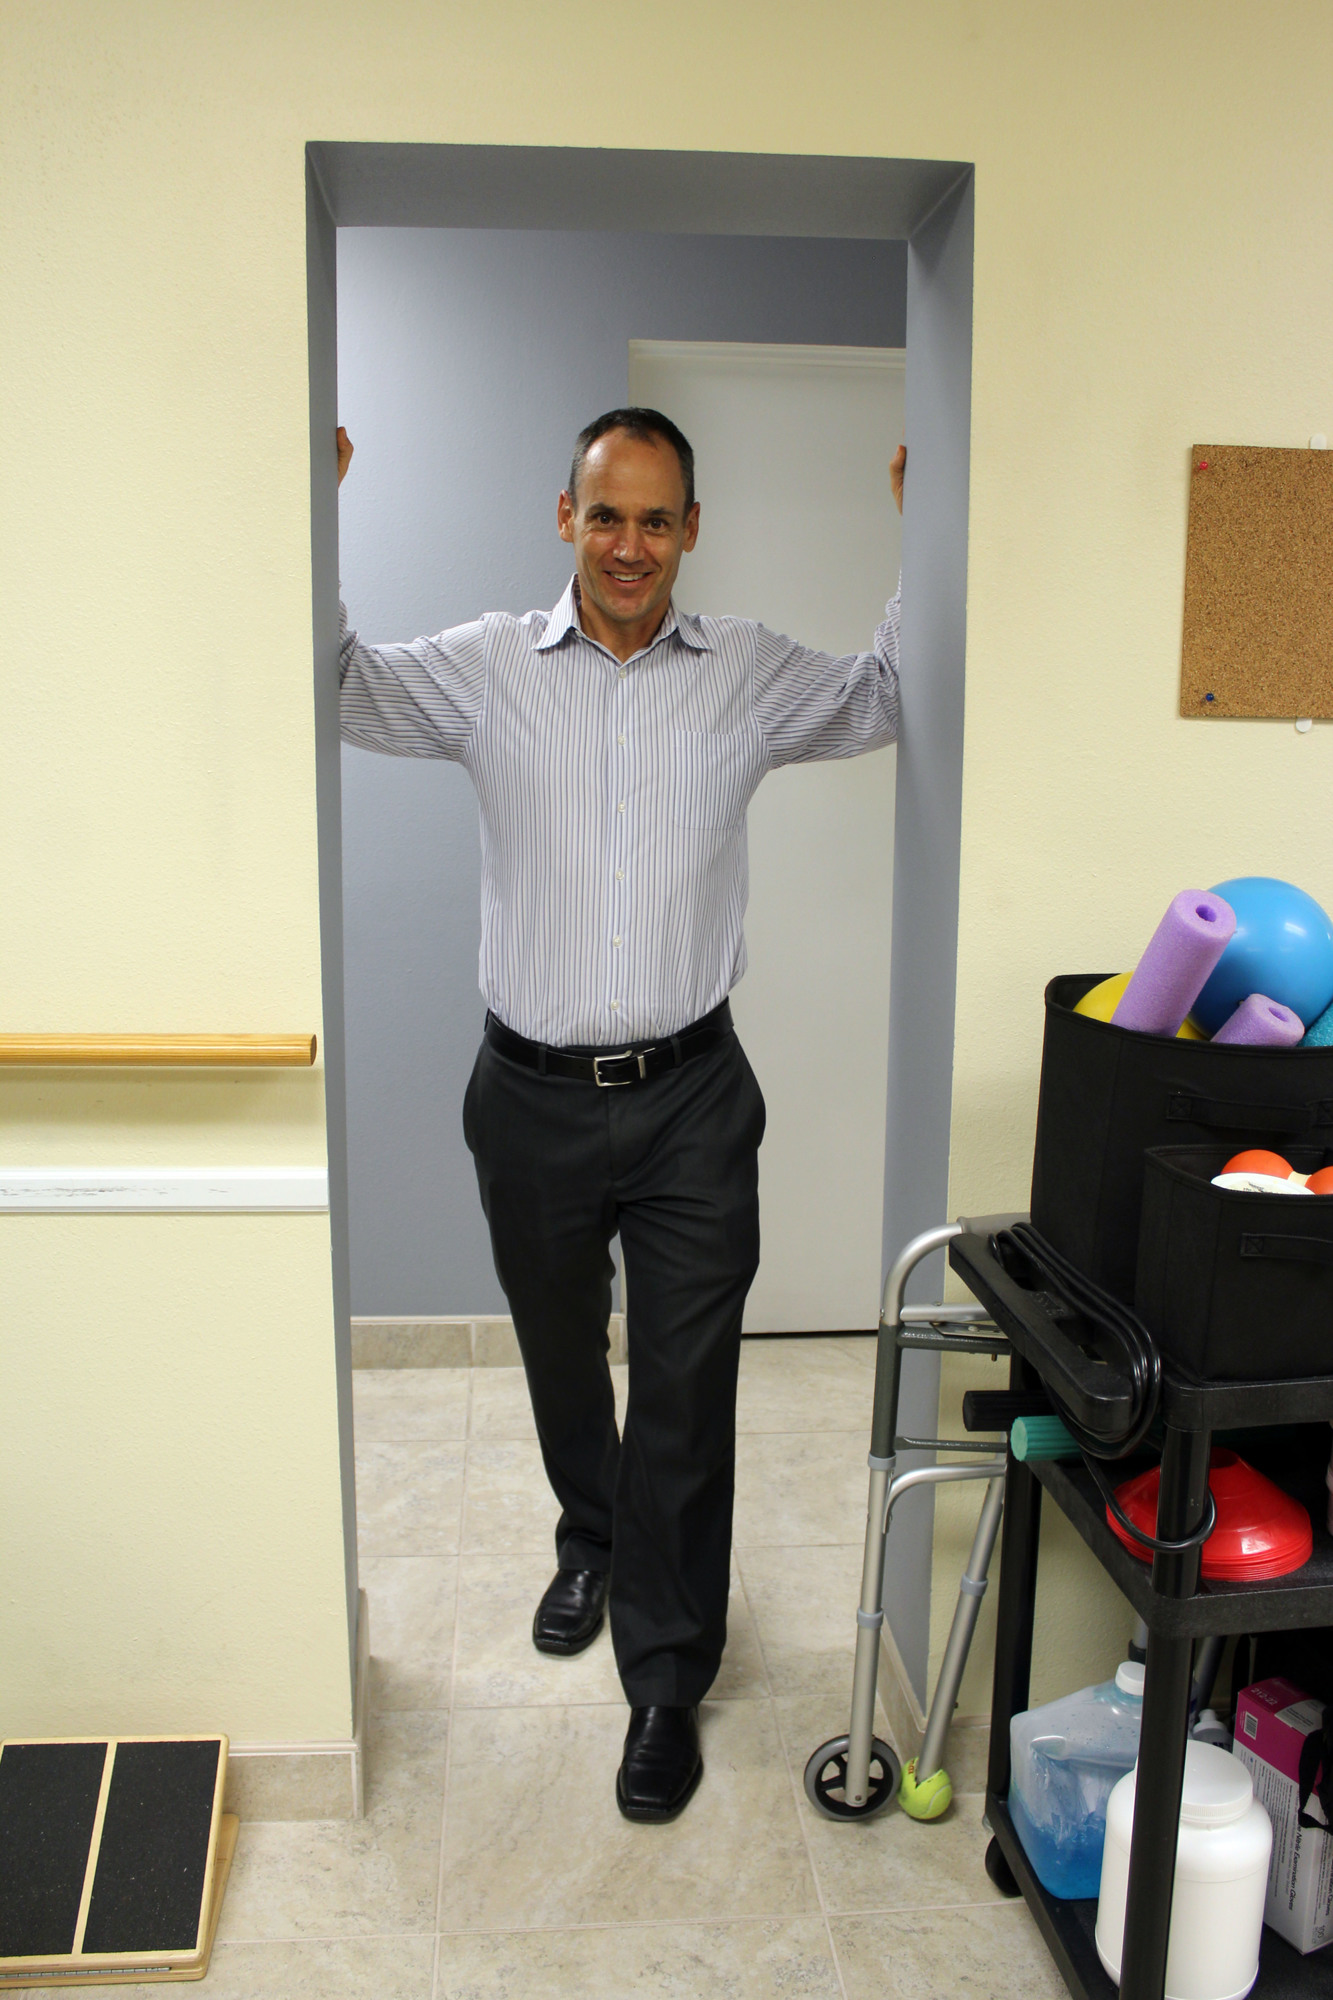 Stretching your chest on a door frame can relieve tightness and improve posture.